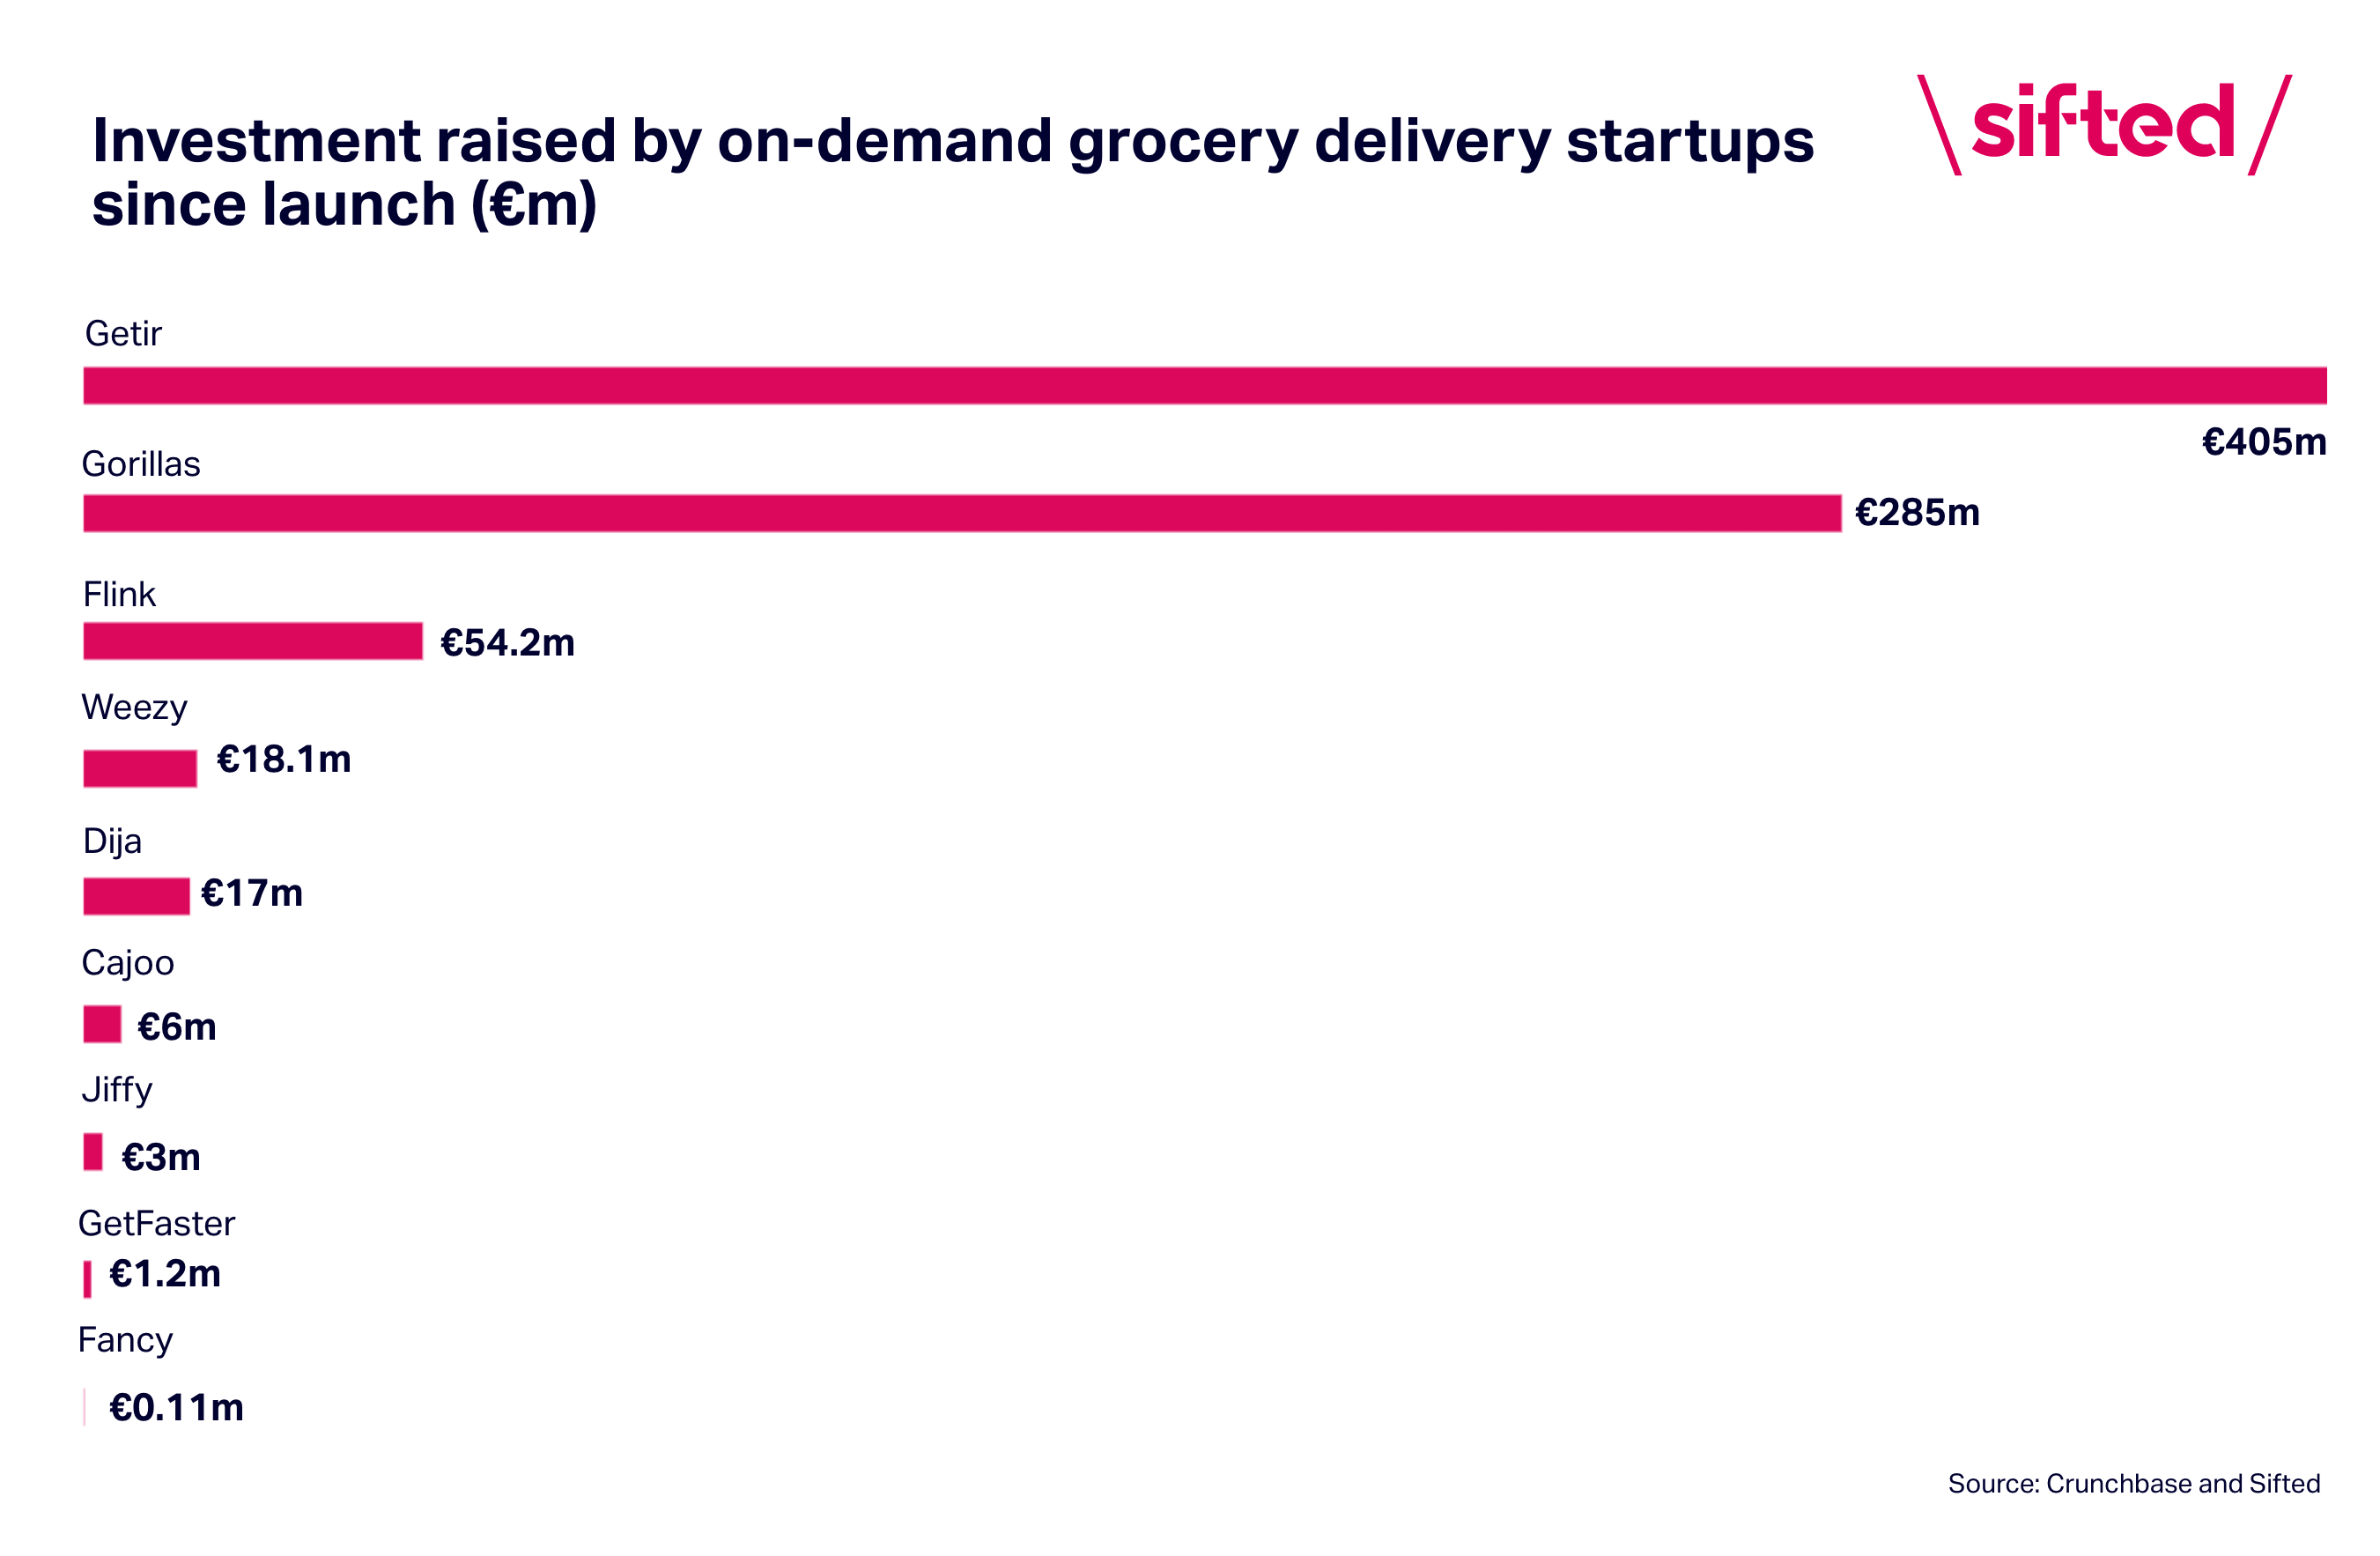 VC investment on-demand grocery